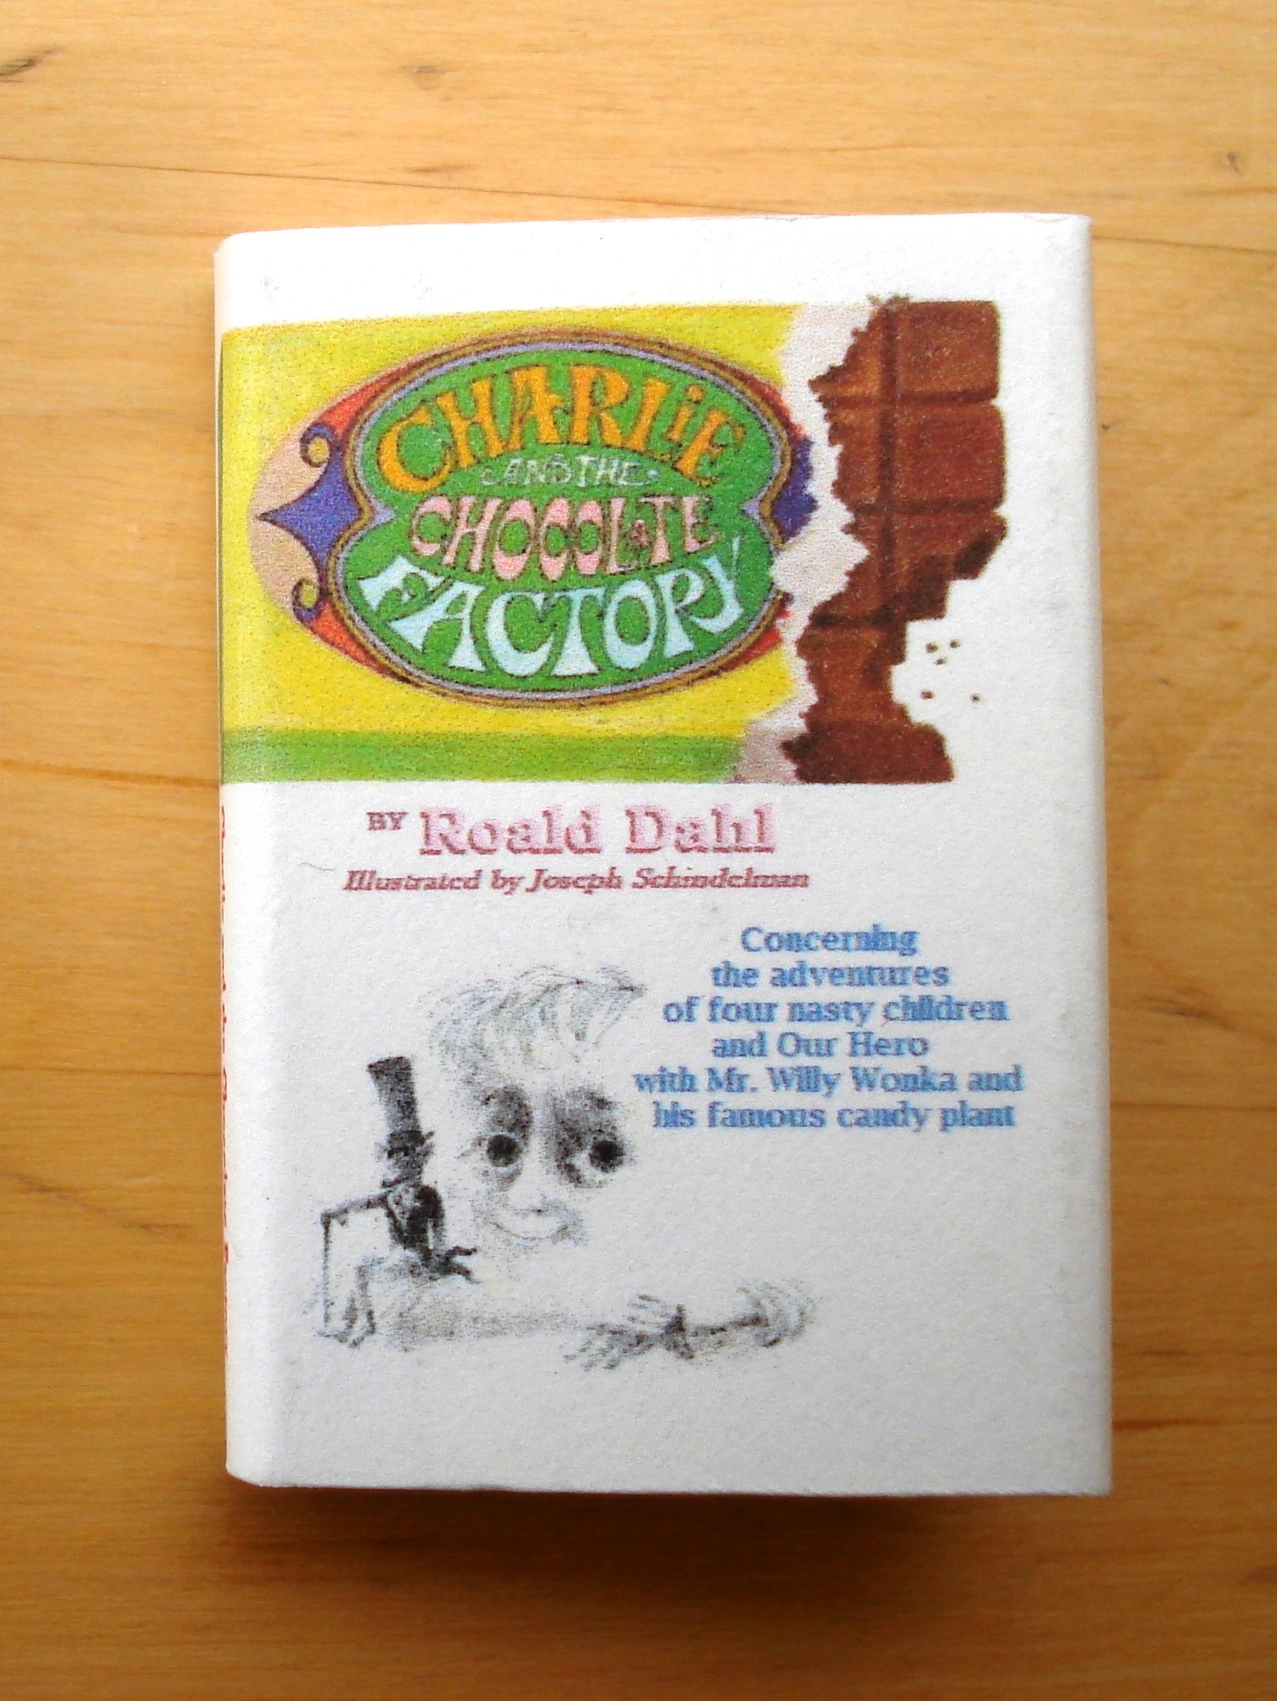 MINI LIVRE CHARLIE AND THE CHOCOLAT FACTORY